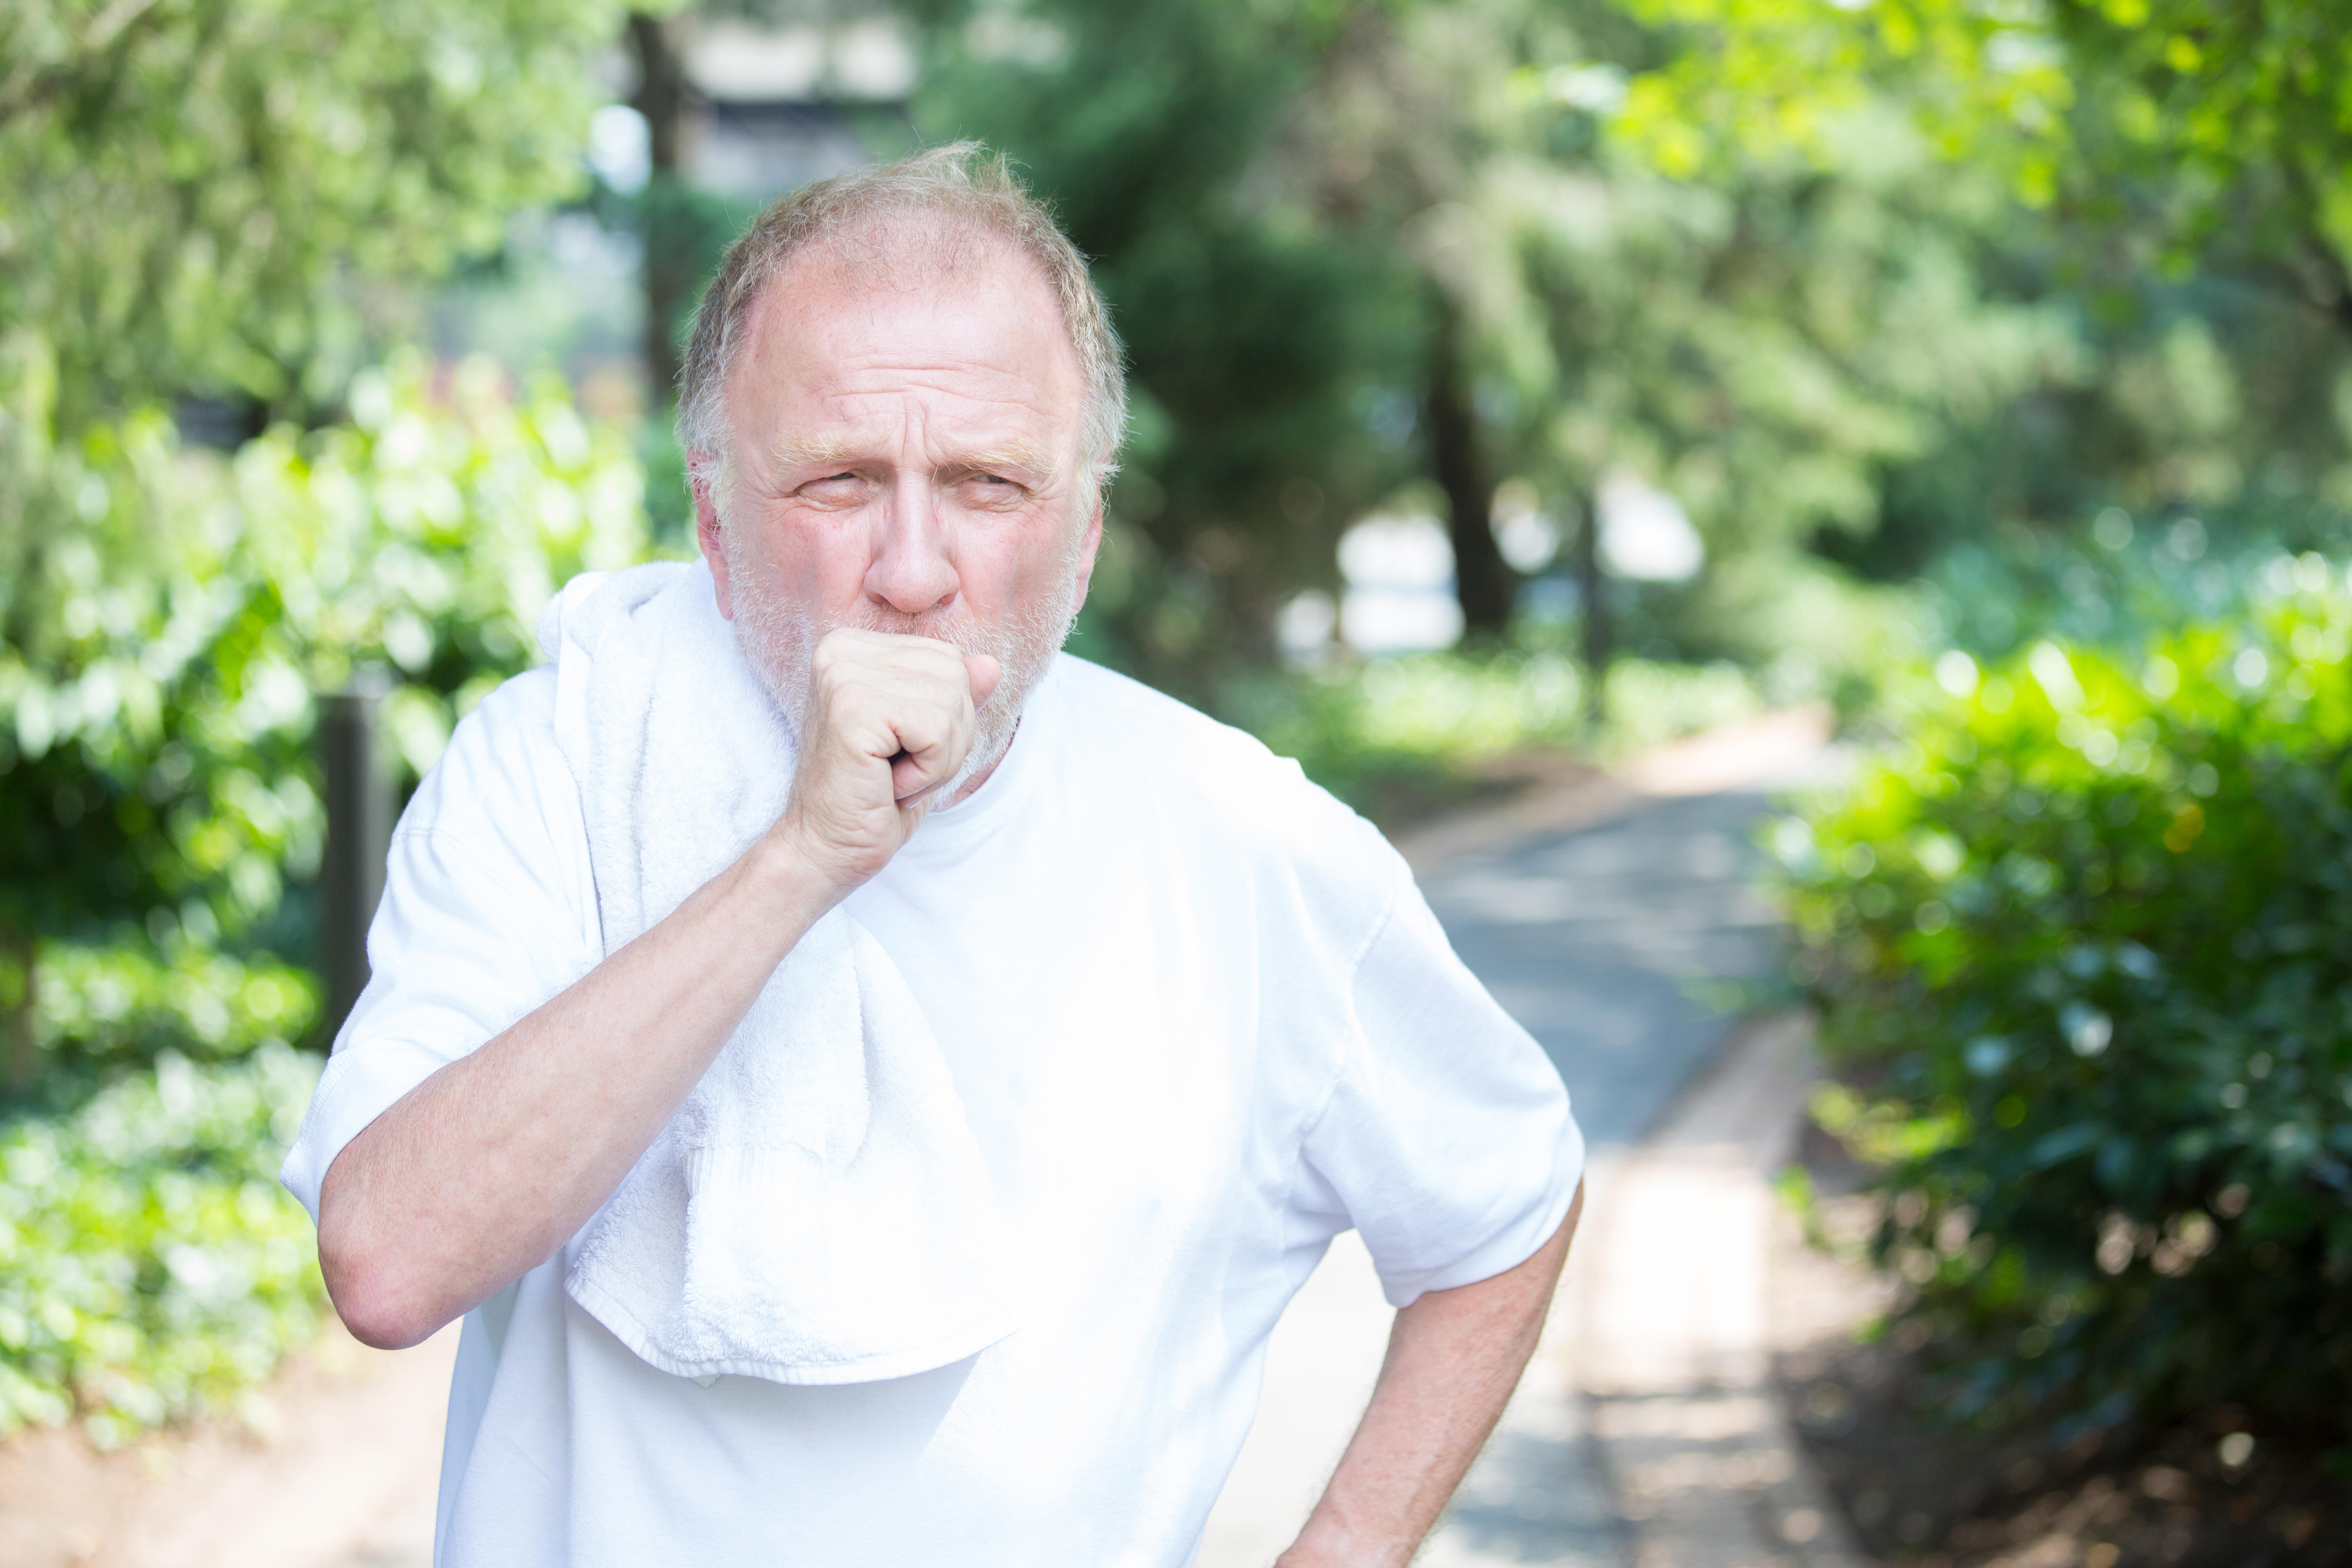 Man experiencing breathlessness